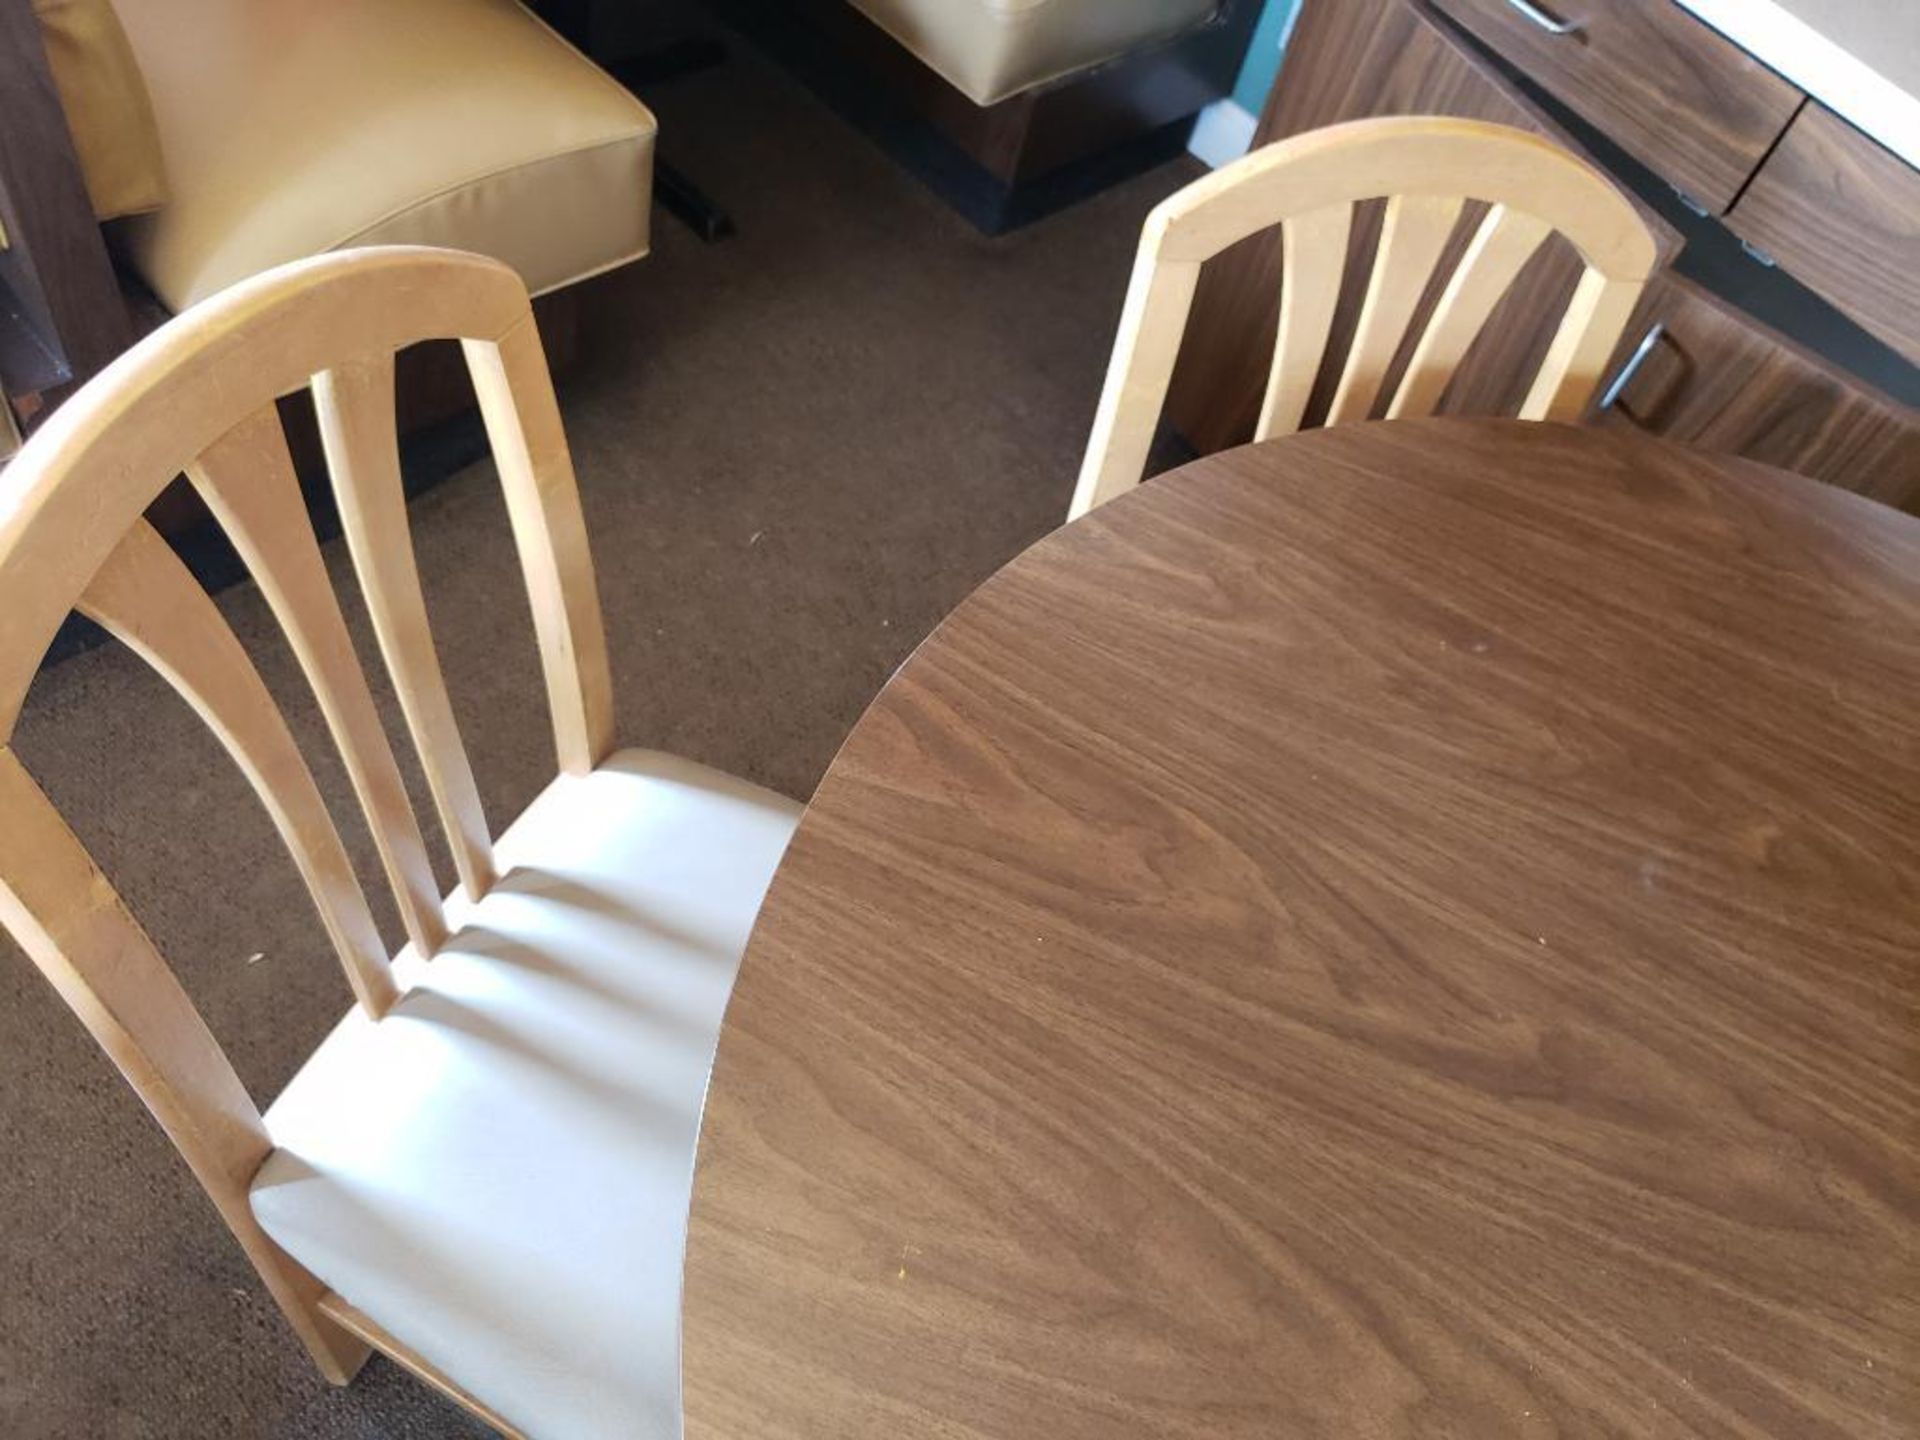 Table with 4 chairs. Table size 47in round. - Image 3 of 4